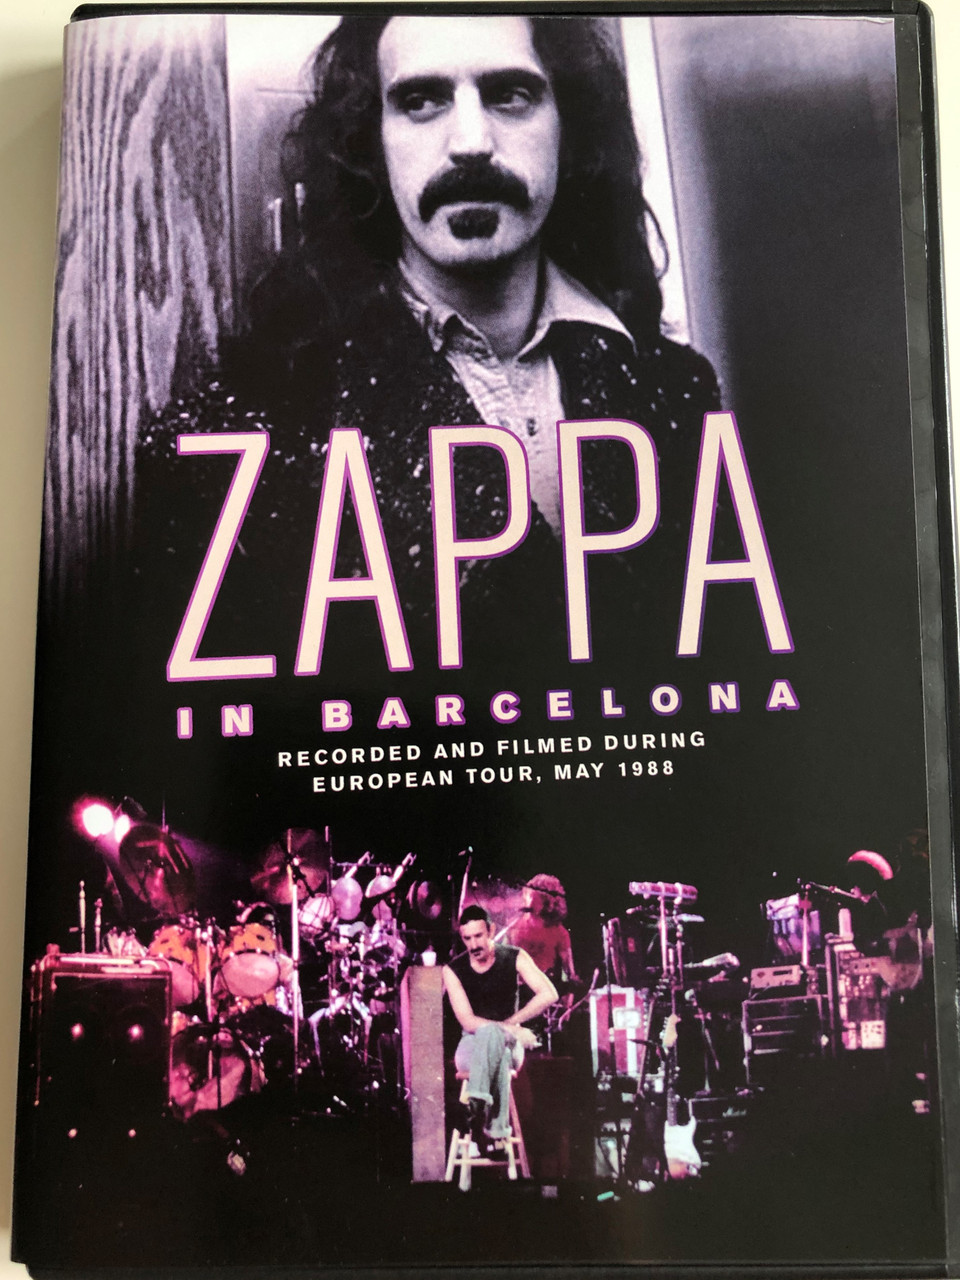 Zappa in Barcelona DVD 2007 / Recorded and Filmed During European Tour, May  1988 / Sharleena, Black Napkins, Any Kind of Pain, Sofa, Love of My Life /  Masterplan - bibleinmylanguage